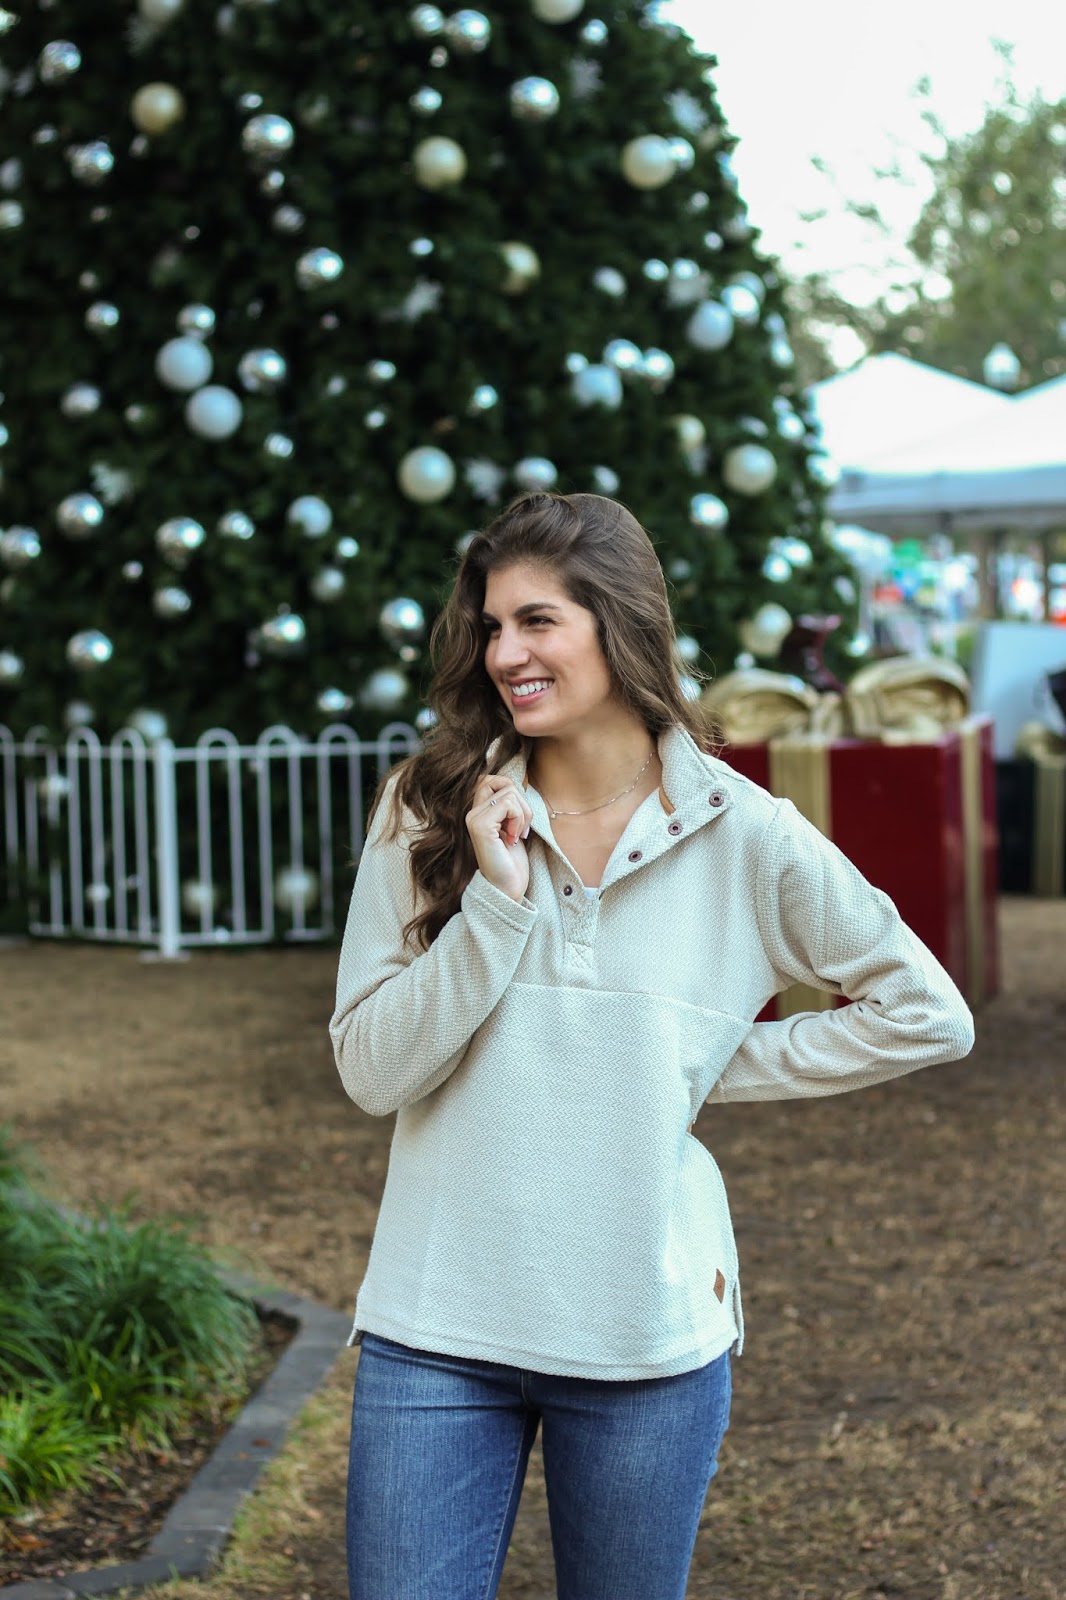 Southern Shirt: The Coziest Pieces You Need Right Now